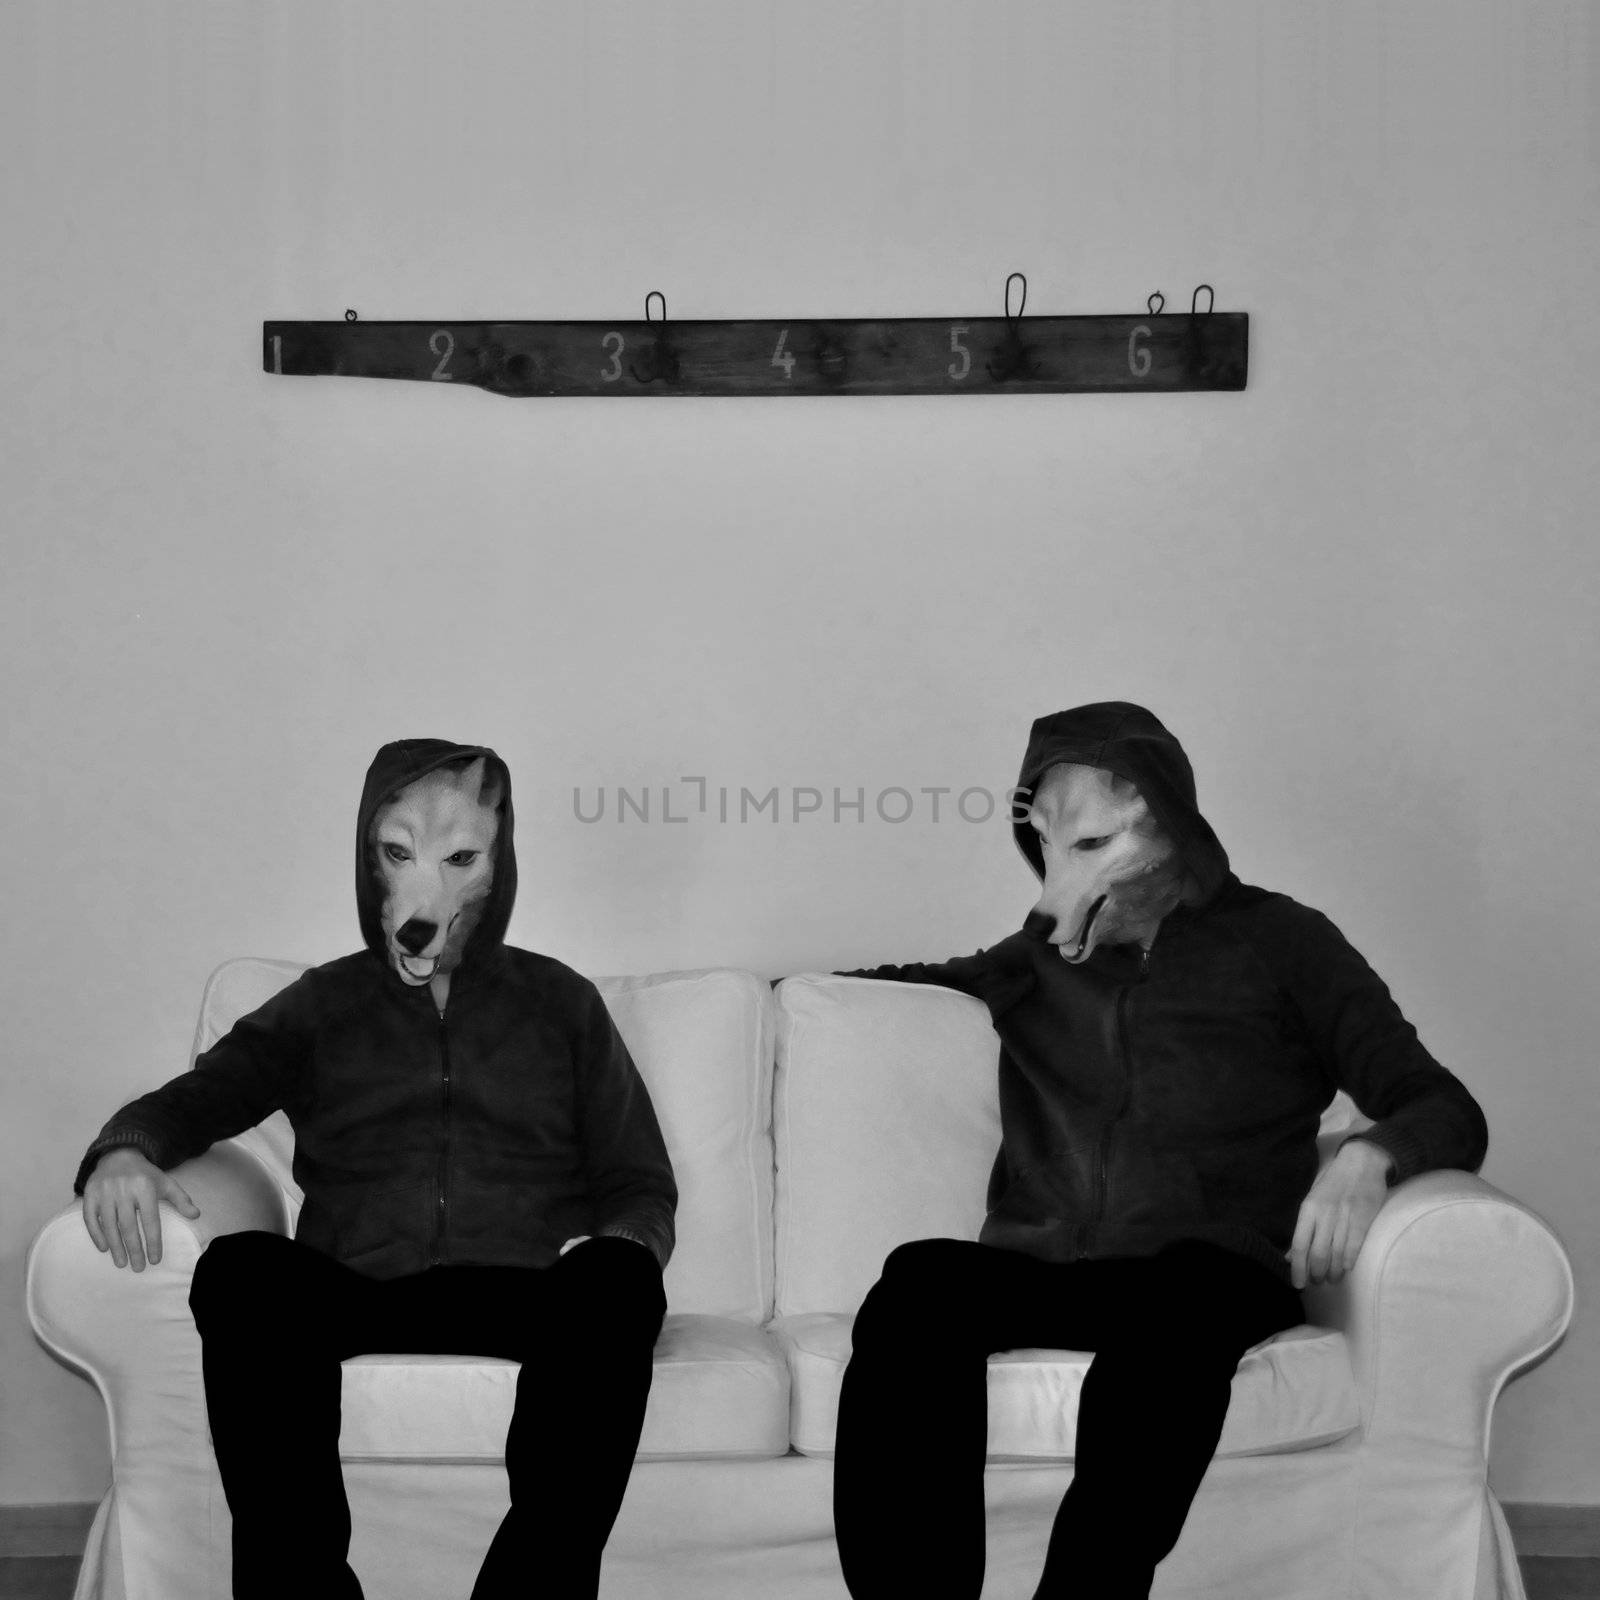 Two figures with dog mask sitting on couch. Black and white.